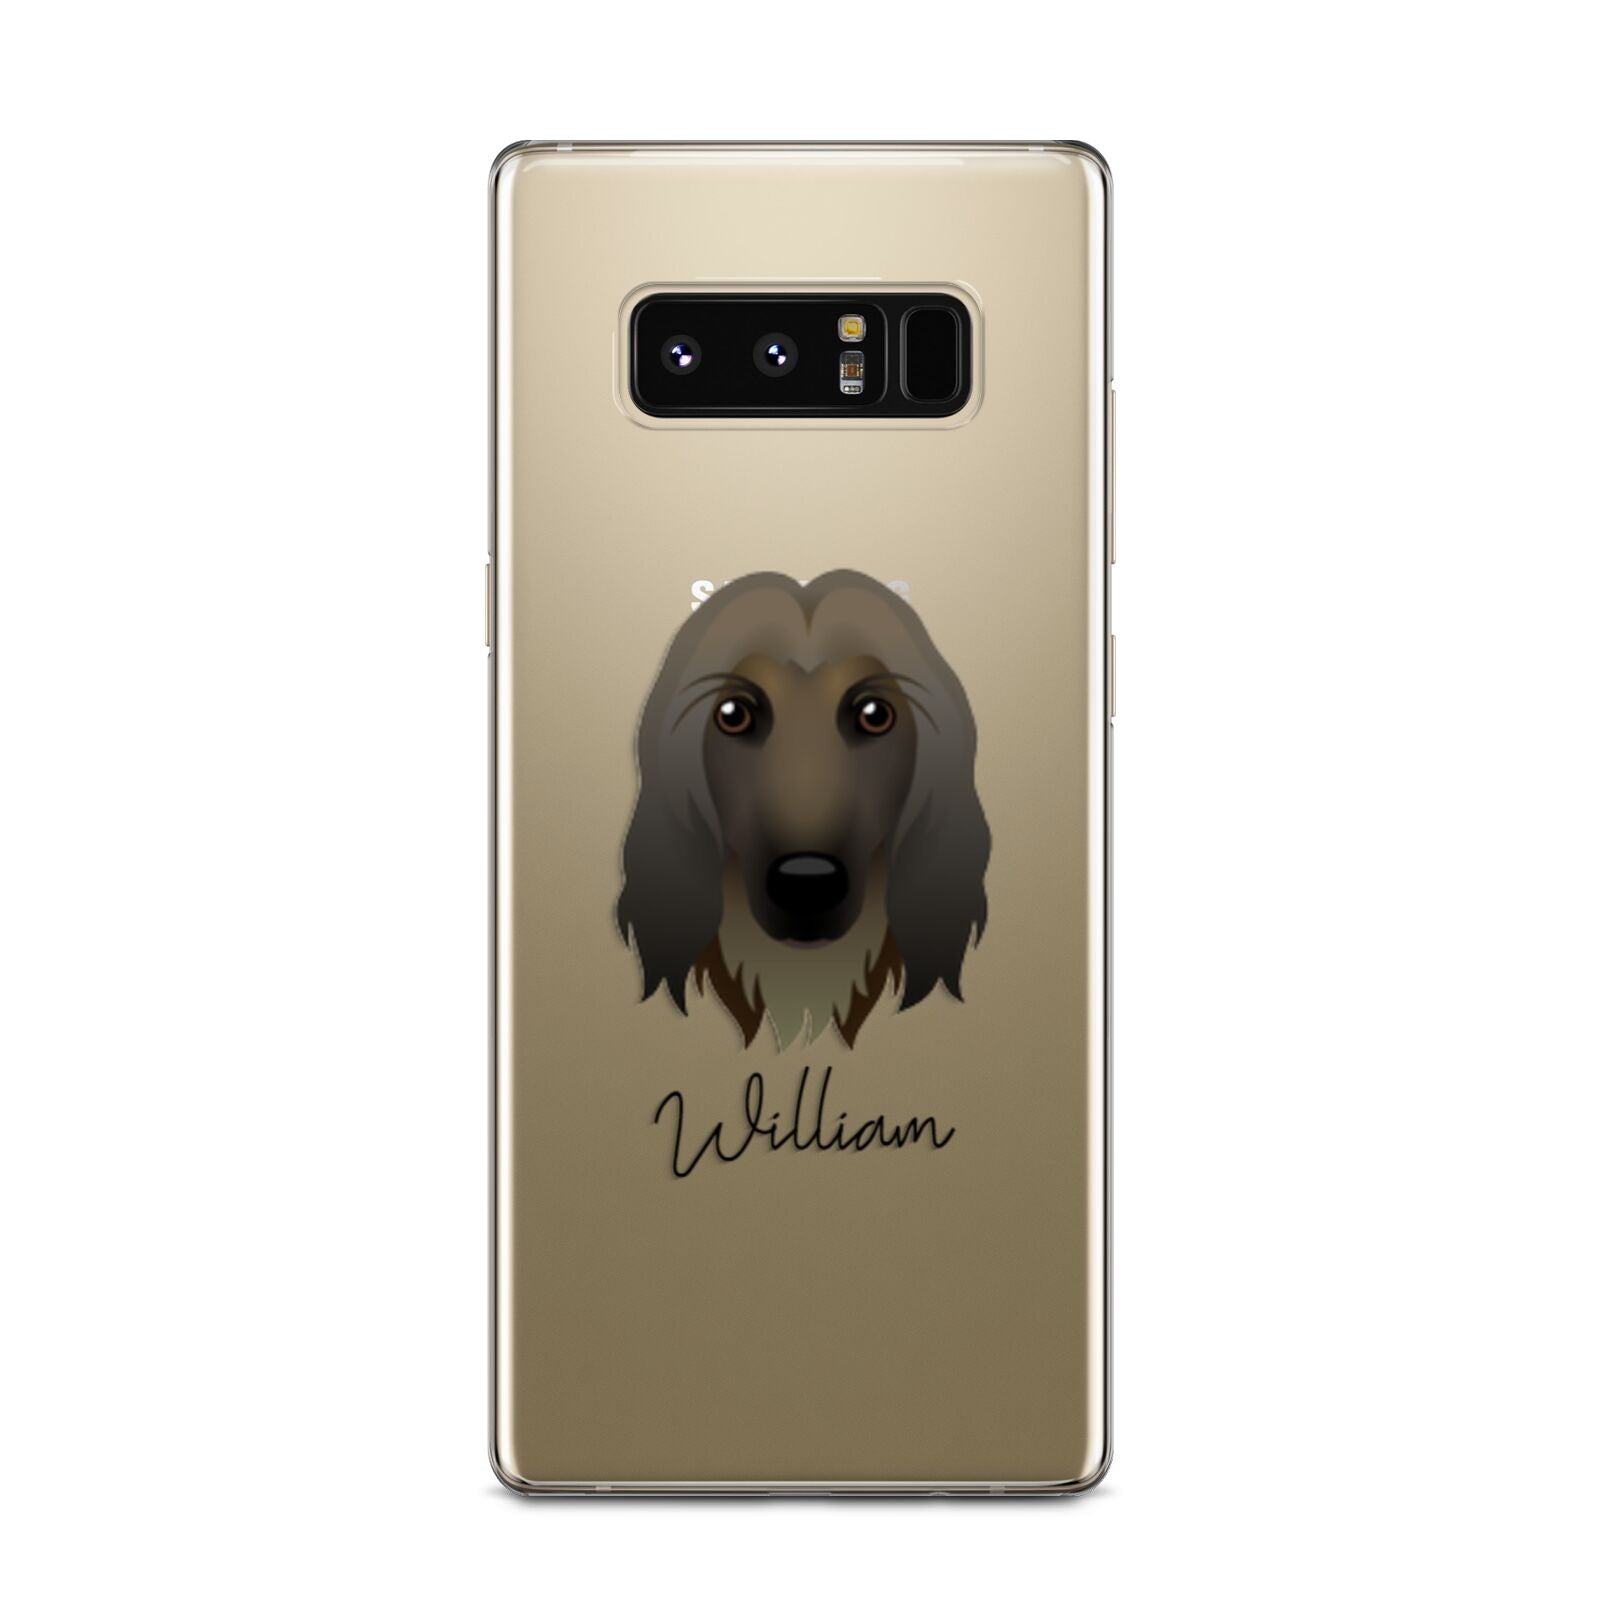 Afghan Hound Personalised Samsung Galaxy Note 8 Case